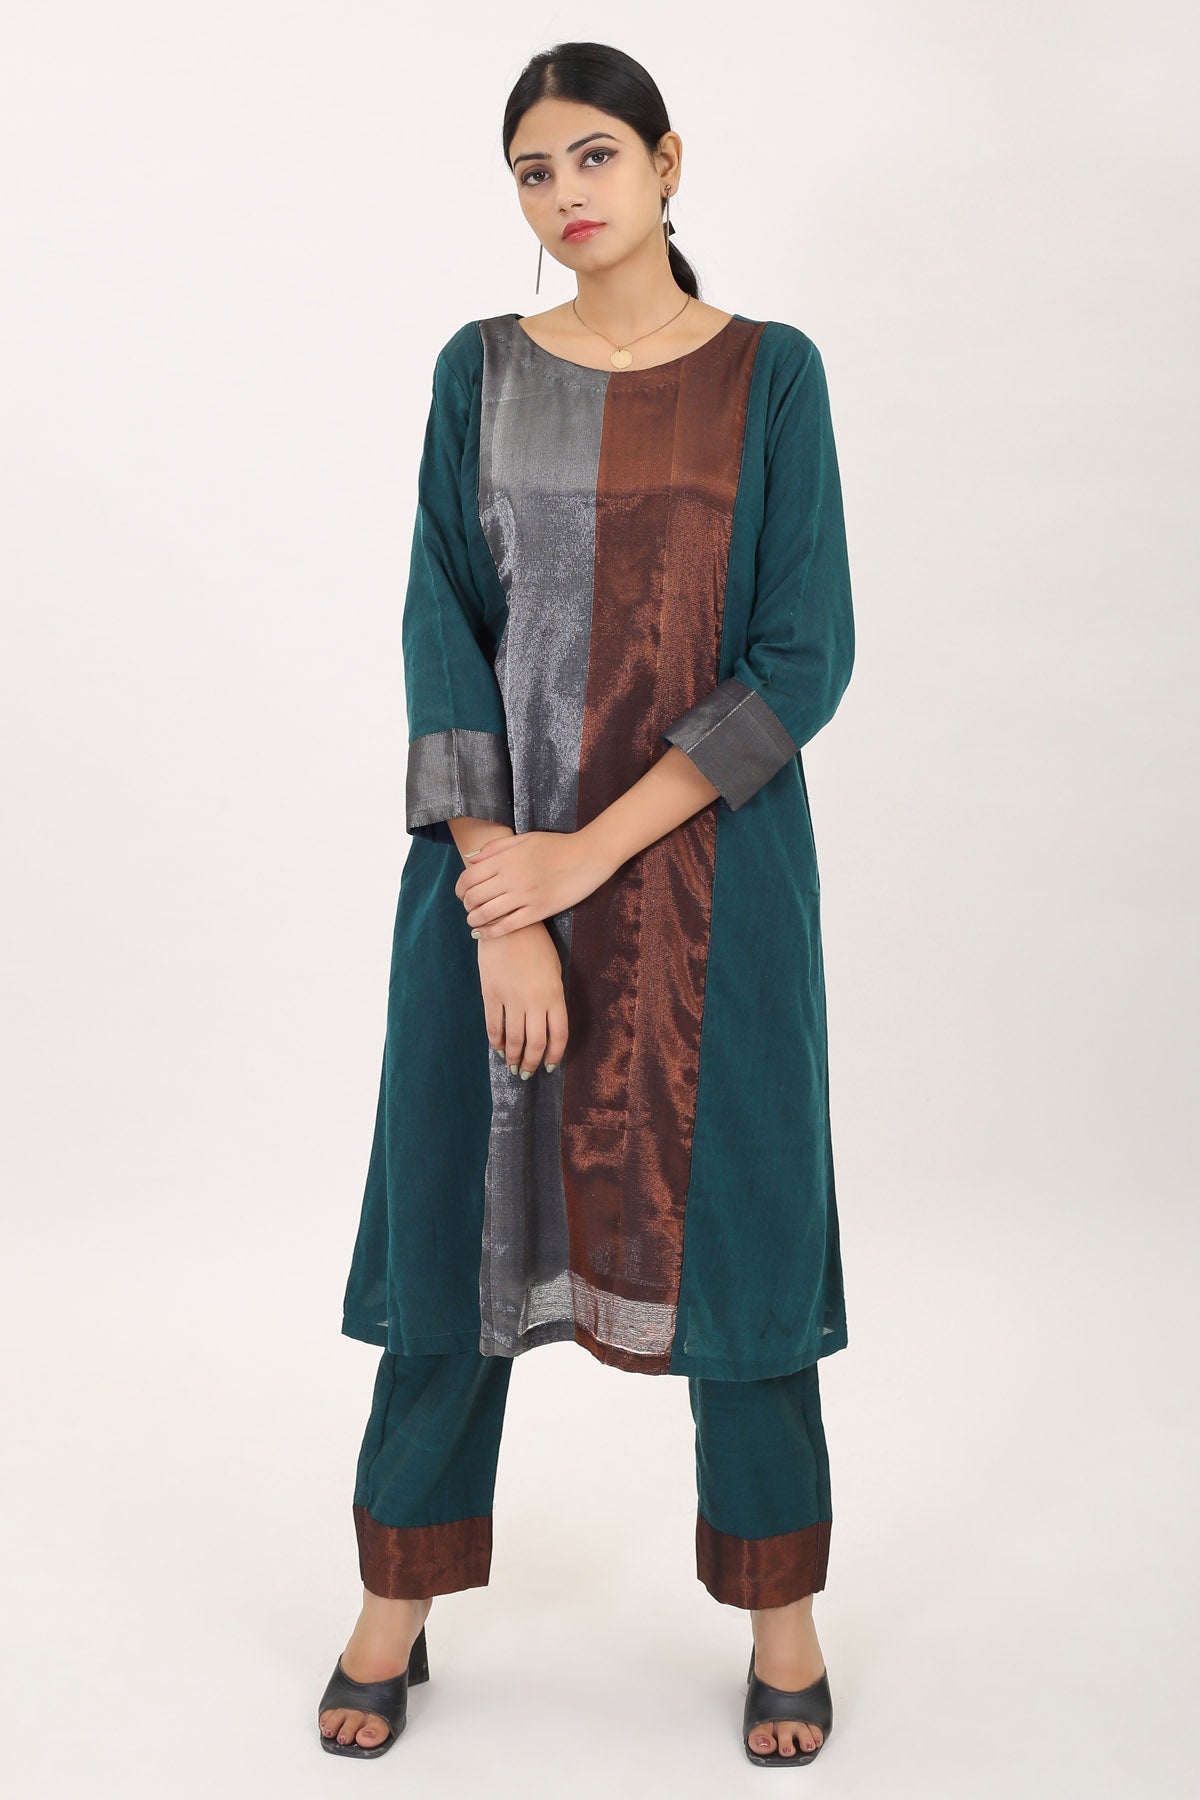 Buy Simply Kitsch Green Kurta Set for Women online available at ScrollnShops